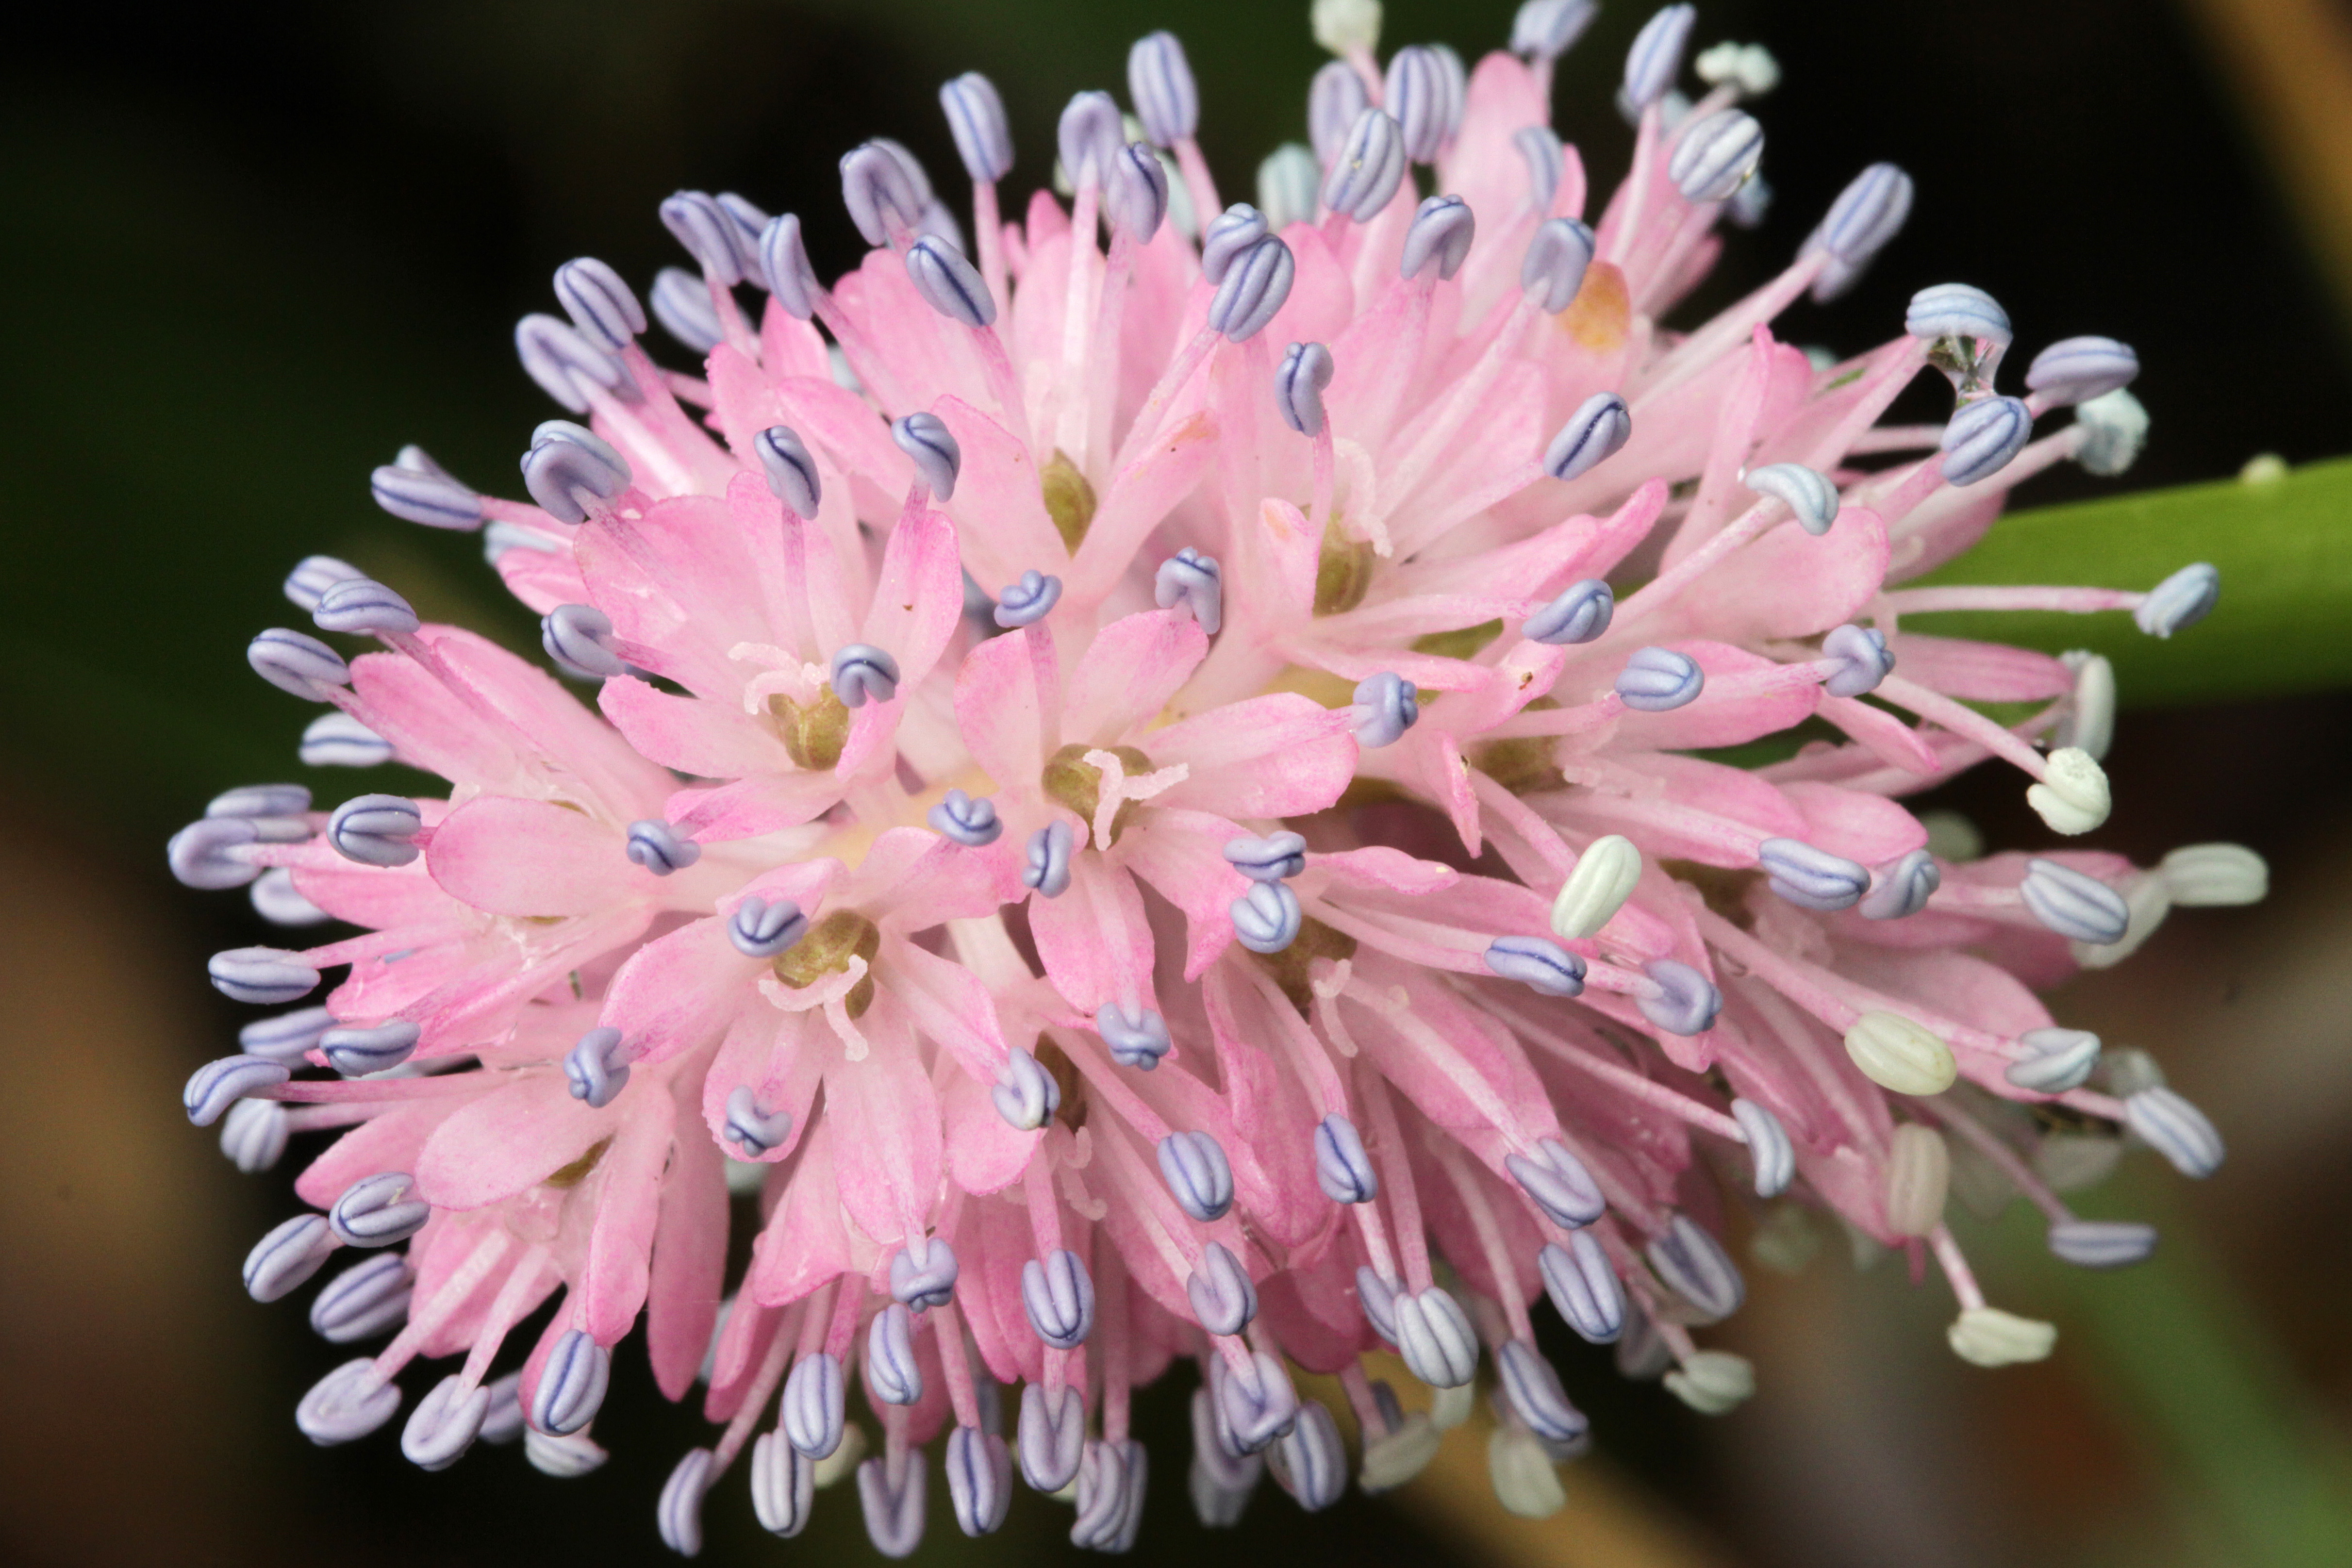 The Scientific Name is Helonias bullata. You will likely hear them called Swamp Pink. This picture shows the Each flower has 6 blue anthers that contrast with the 6 tepals.   of Helonias bullata